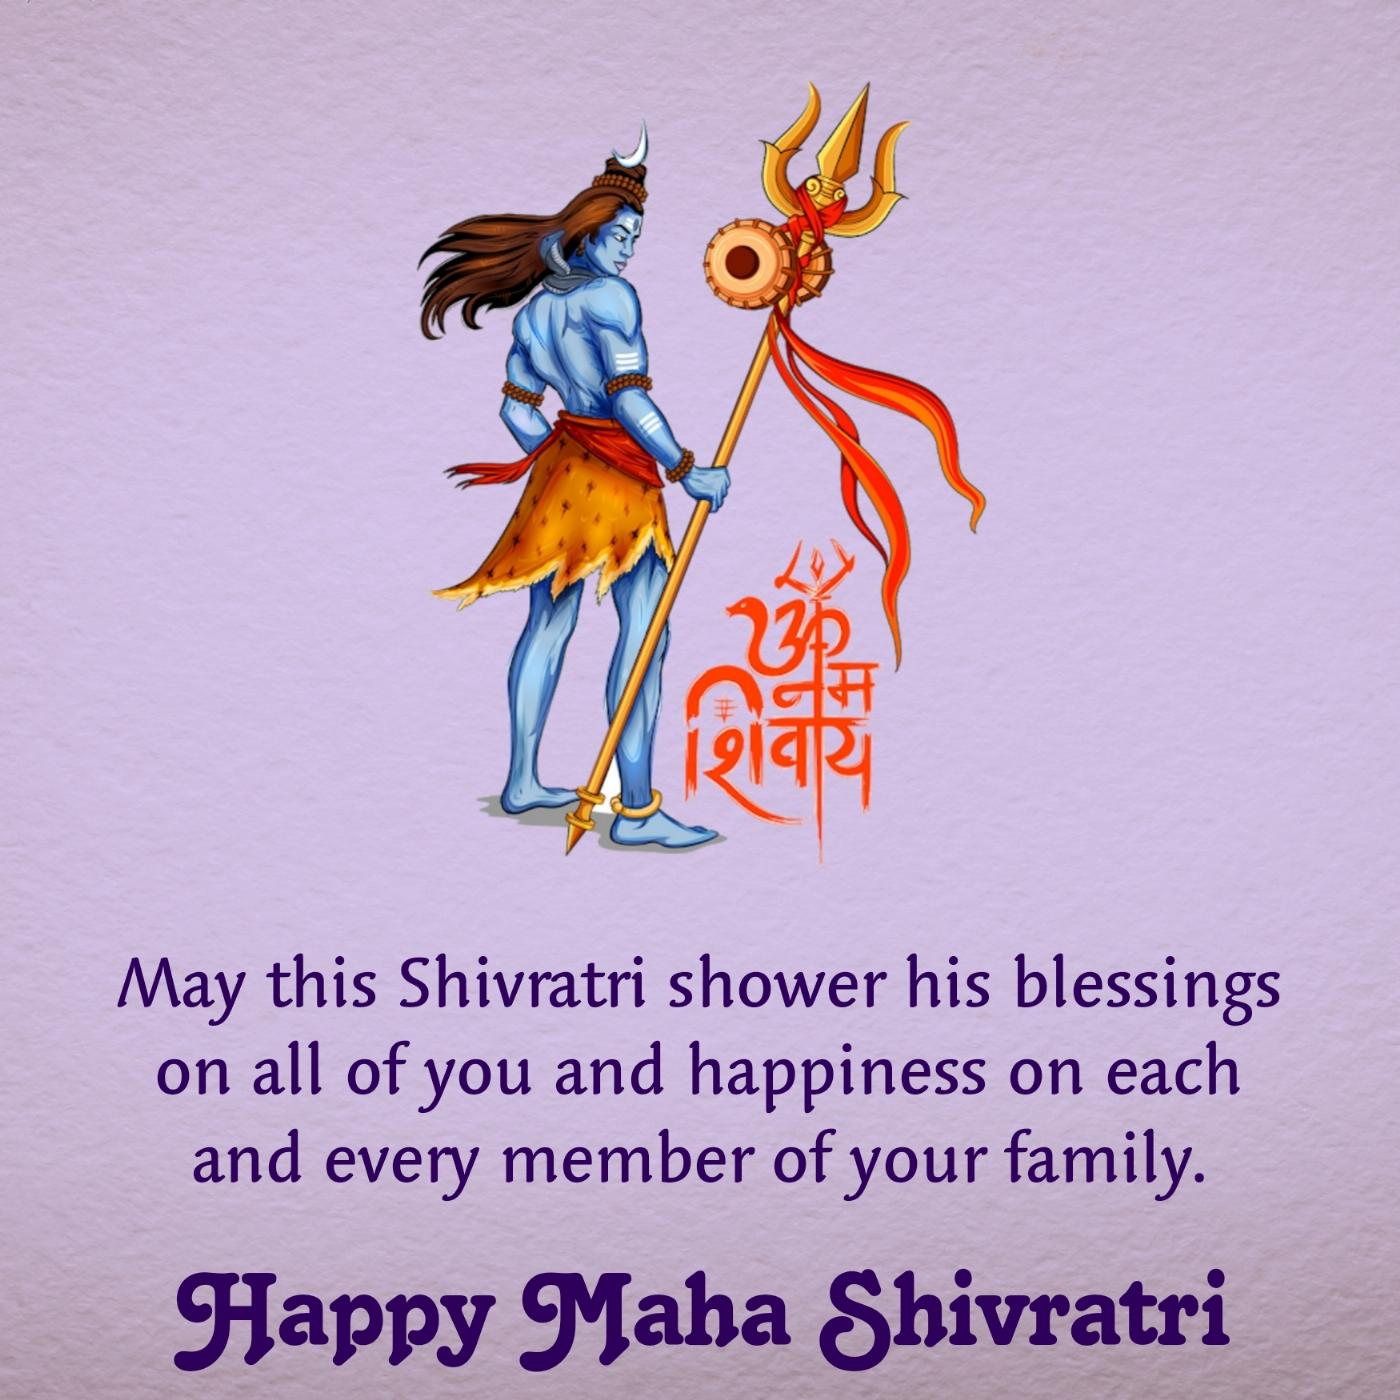 May this Shivratri shower his blessings on all of you